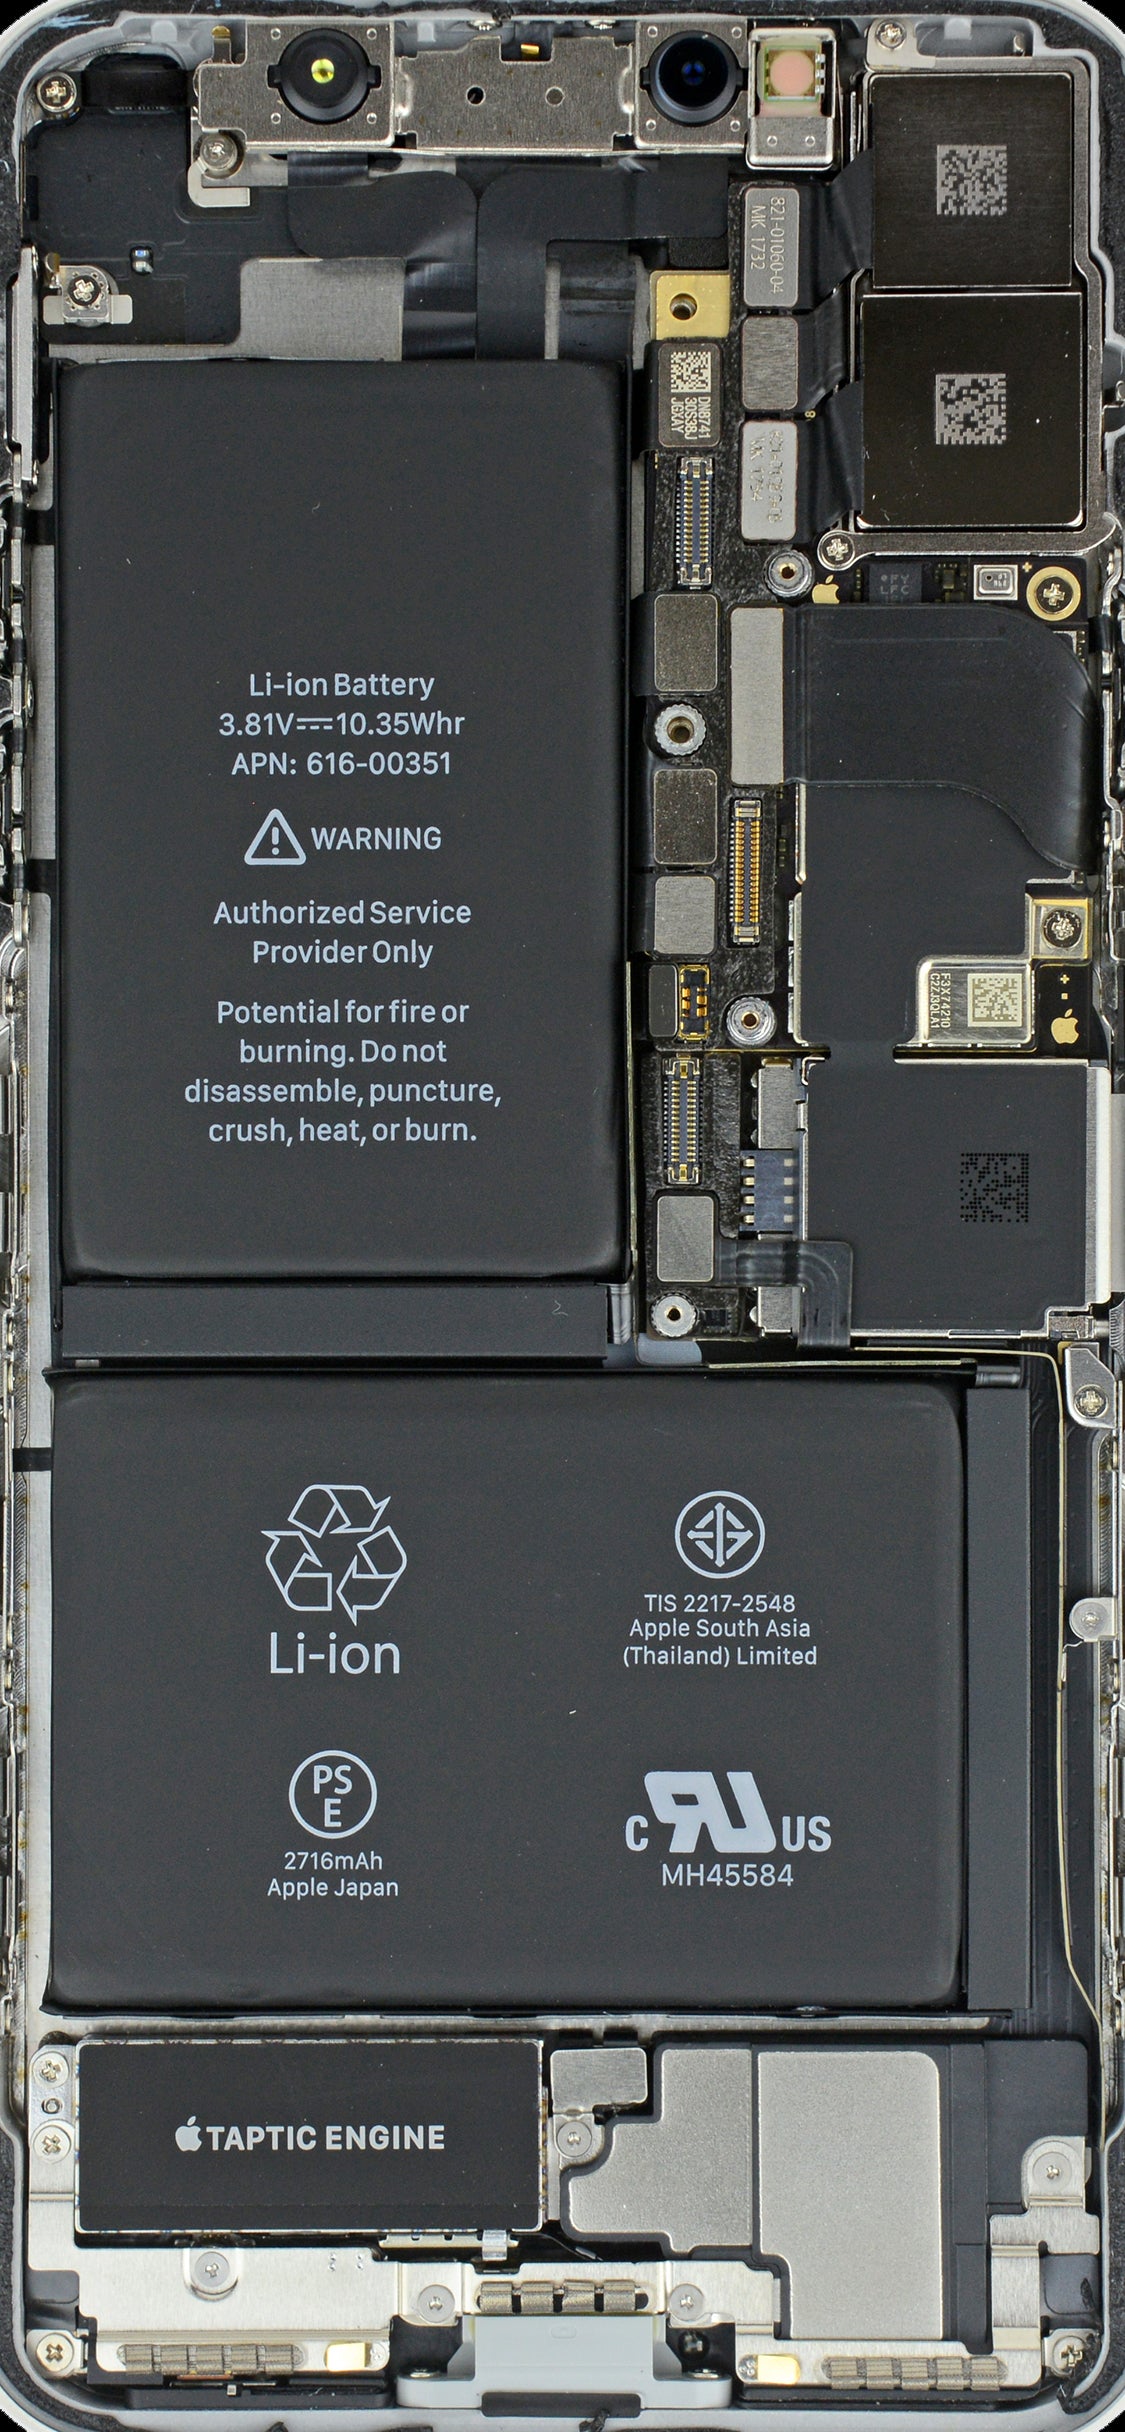 The battery cell separator of the iPhone X may be a thing of the past in the Xs, increasing capacity - Apple's iPhone Xs/Plus tipped to come with high-capacity L-shaped batteries by LG